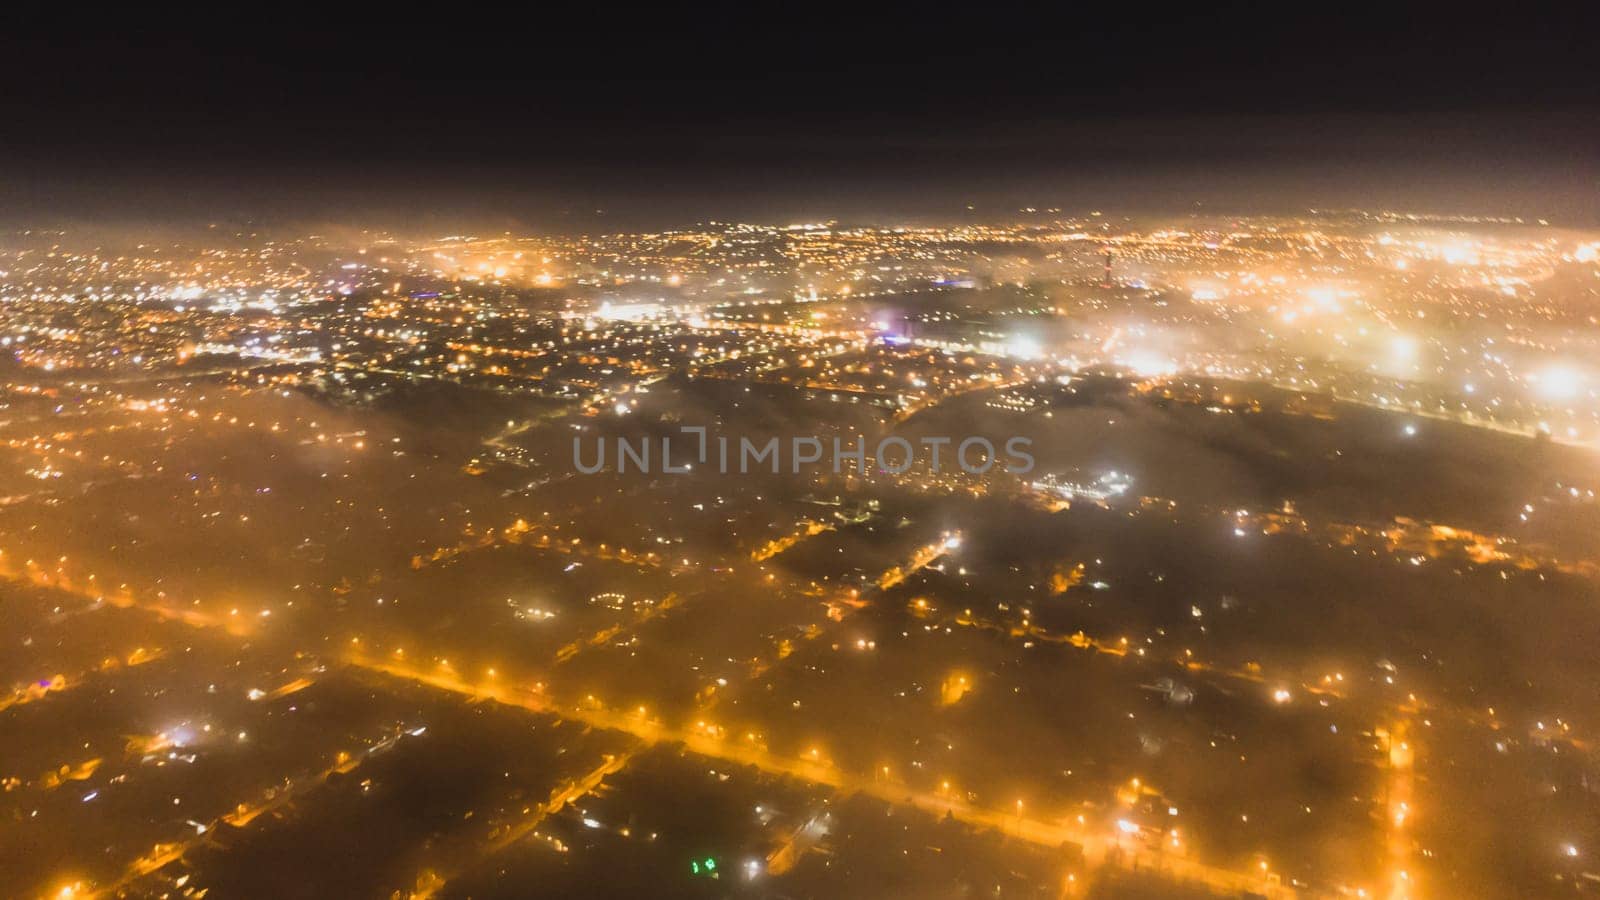 light bokeh city landscape at night sky with many stars, blurred city by fog covered by igor010